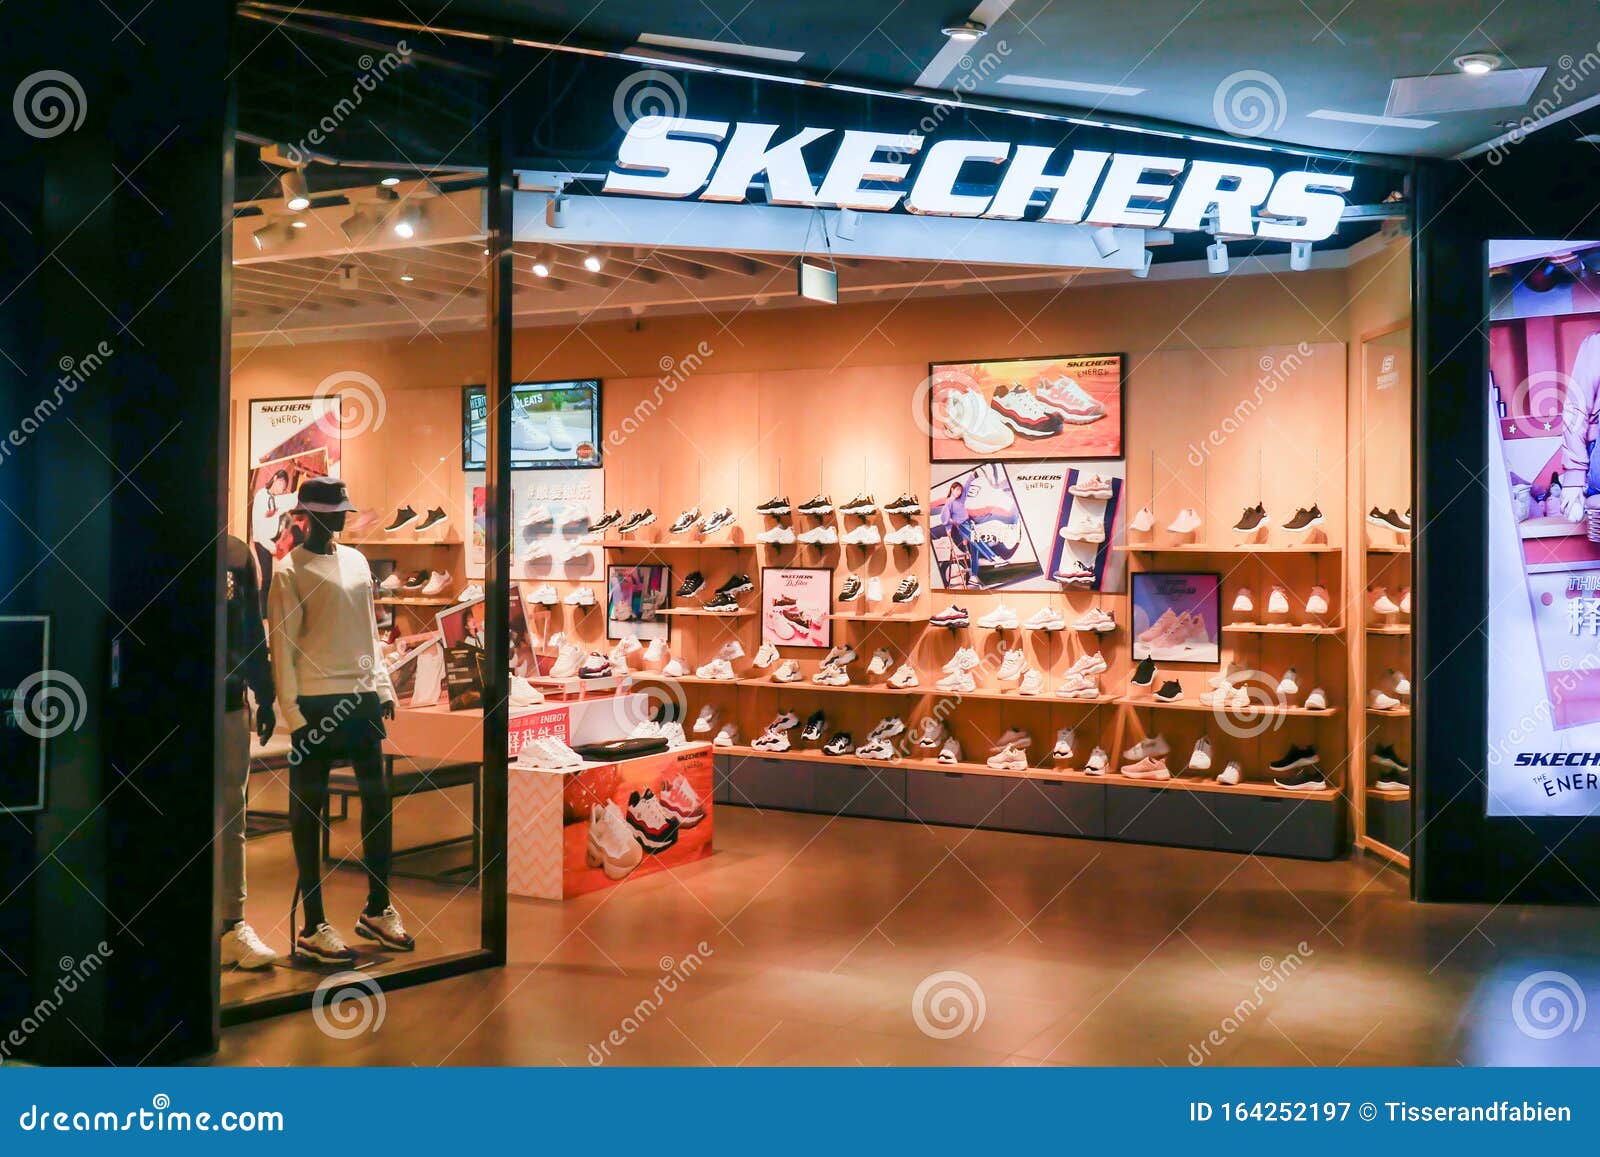 Skechers Store in Shanghai, China, 17-11-19 Editorial Photography ...